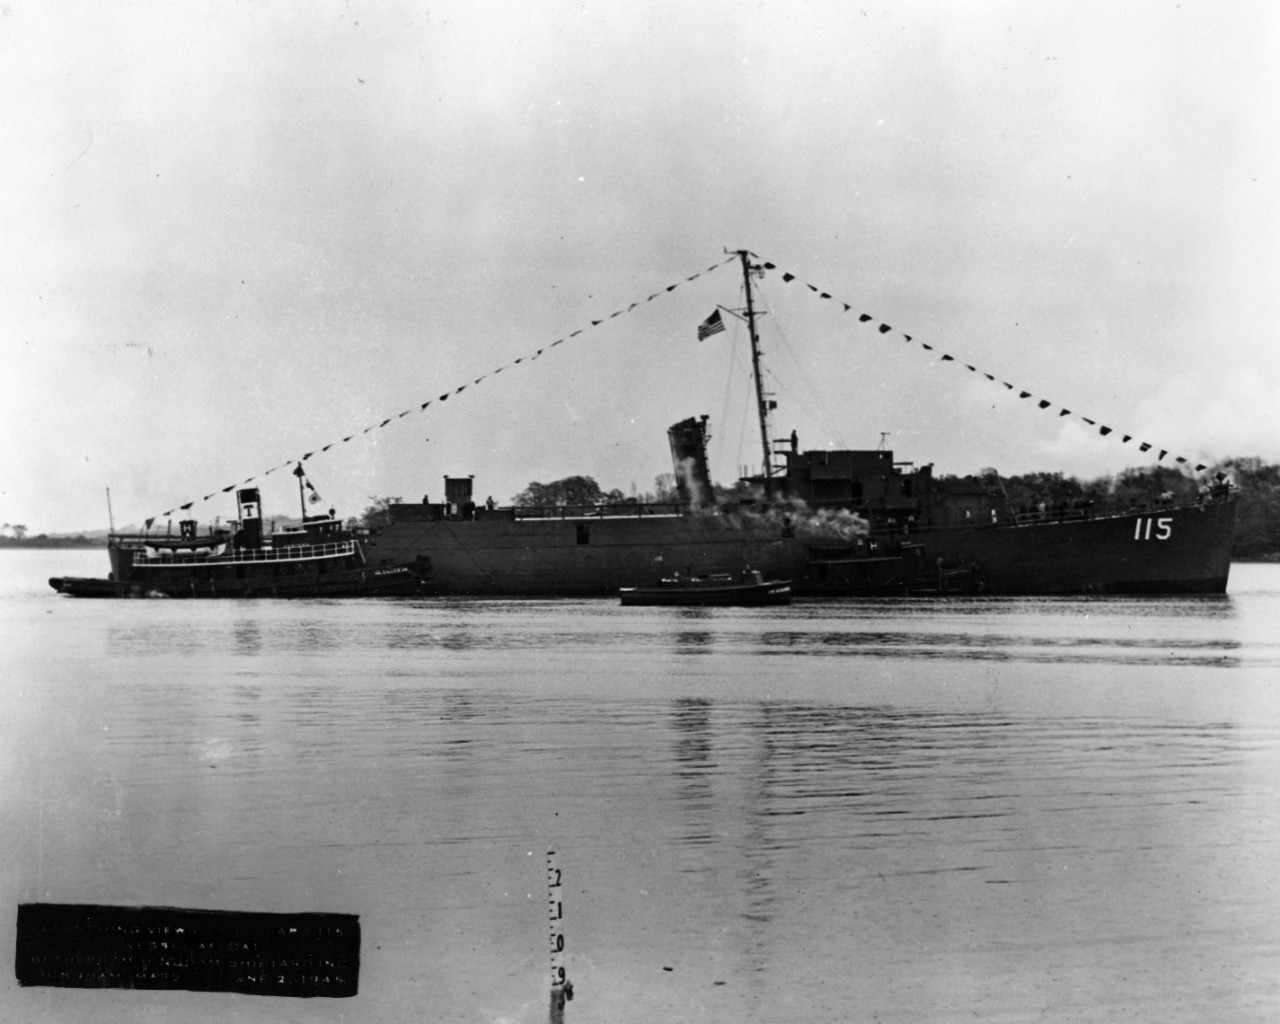 USS Rogers Blood (APD-115), assisted by tugs at Hingham, Massachusetts